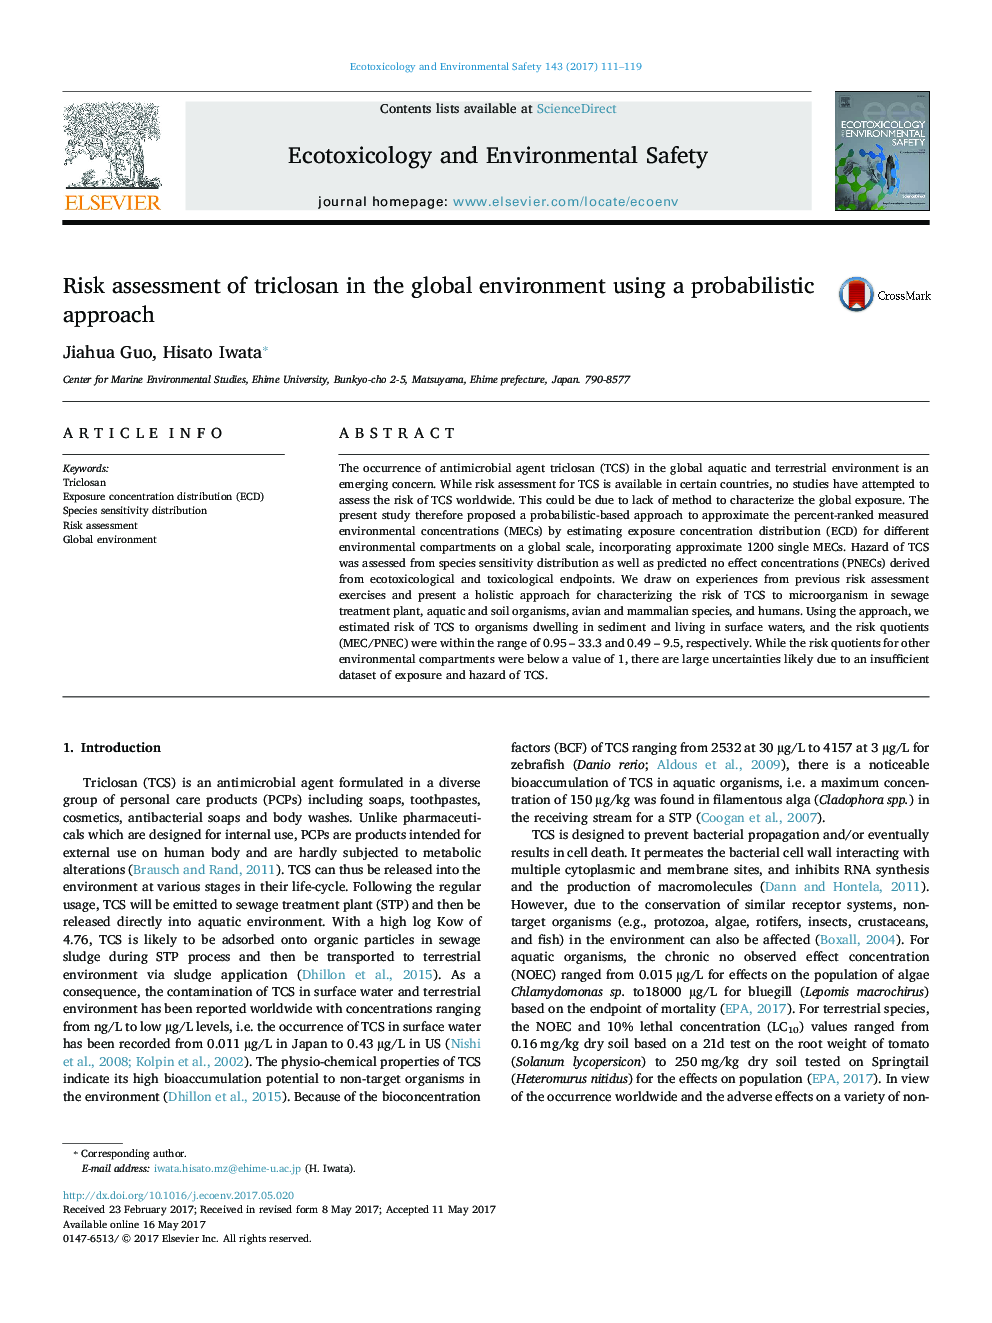 Risk assessment of triclosan in the global environment using a probabilistic approach